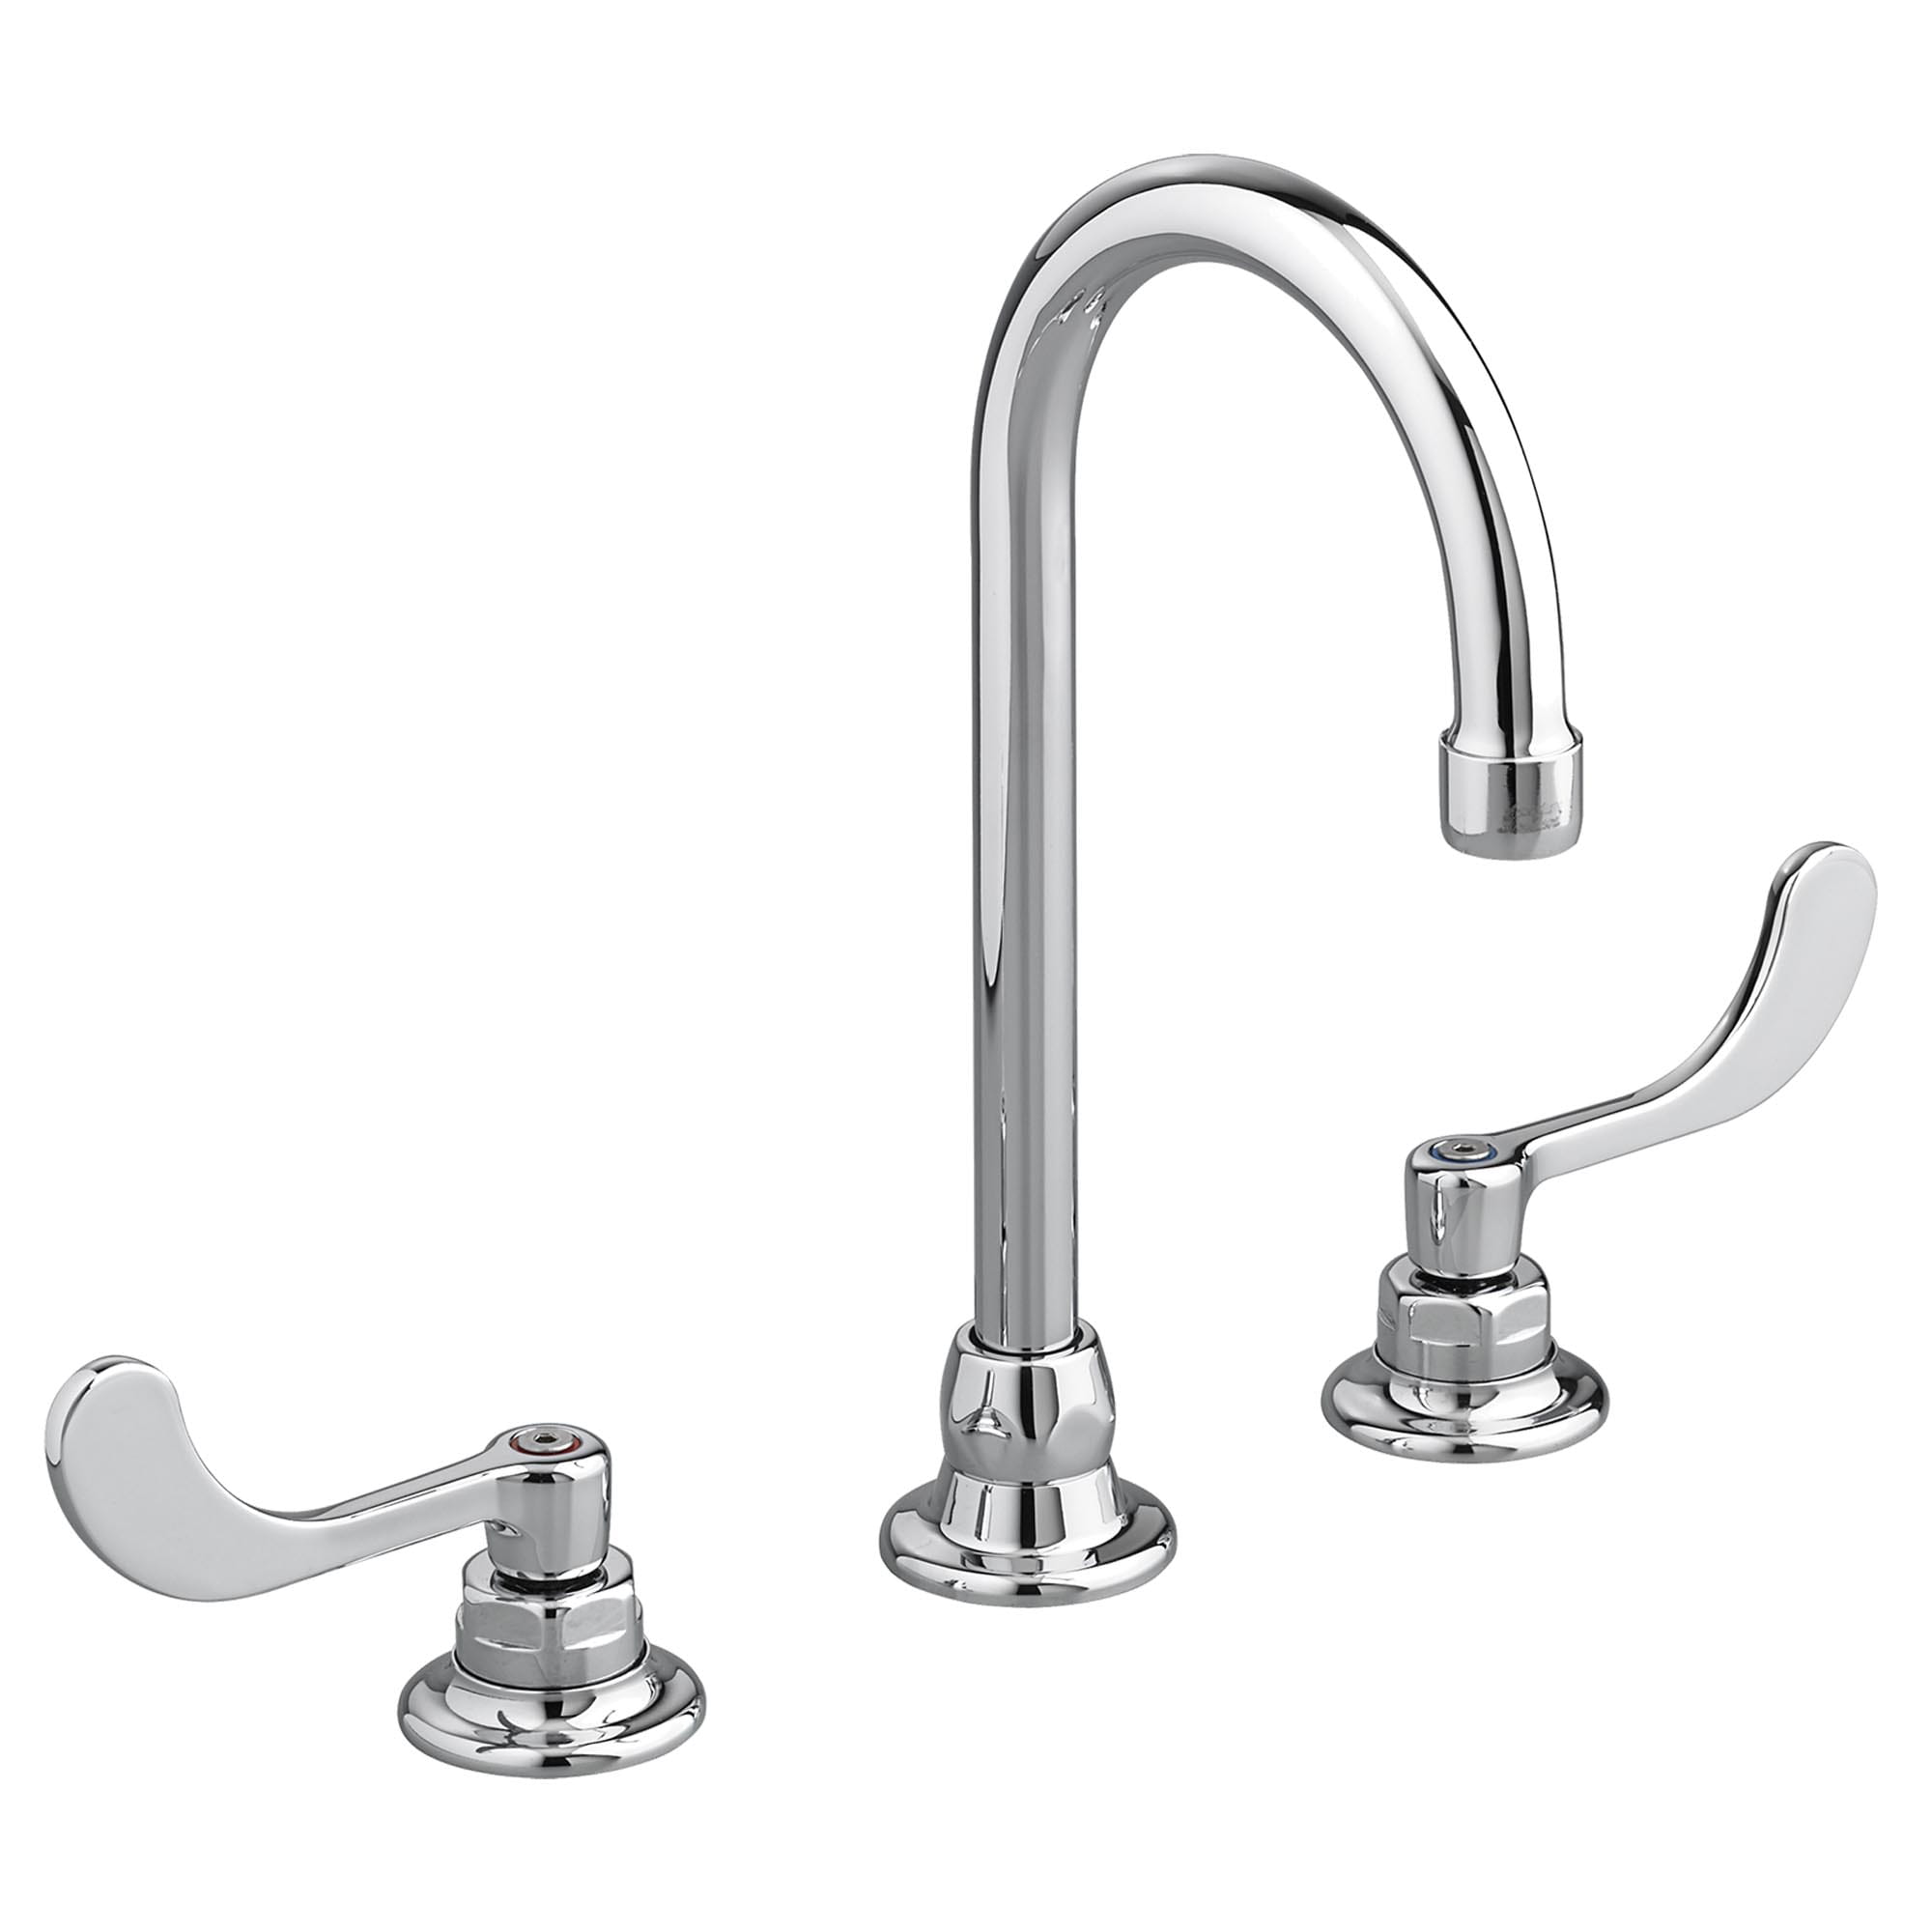 Monterrey® 8-Inch Widespread Gooseneck Faucet With Wrist Blade Handles 1.5  gpm/5.7 Lpm With Limited Swivel